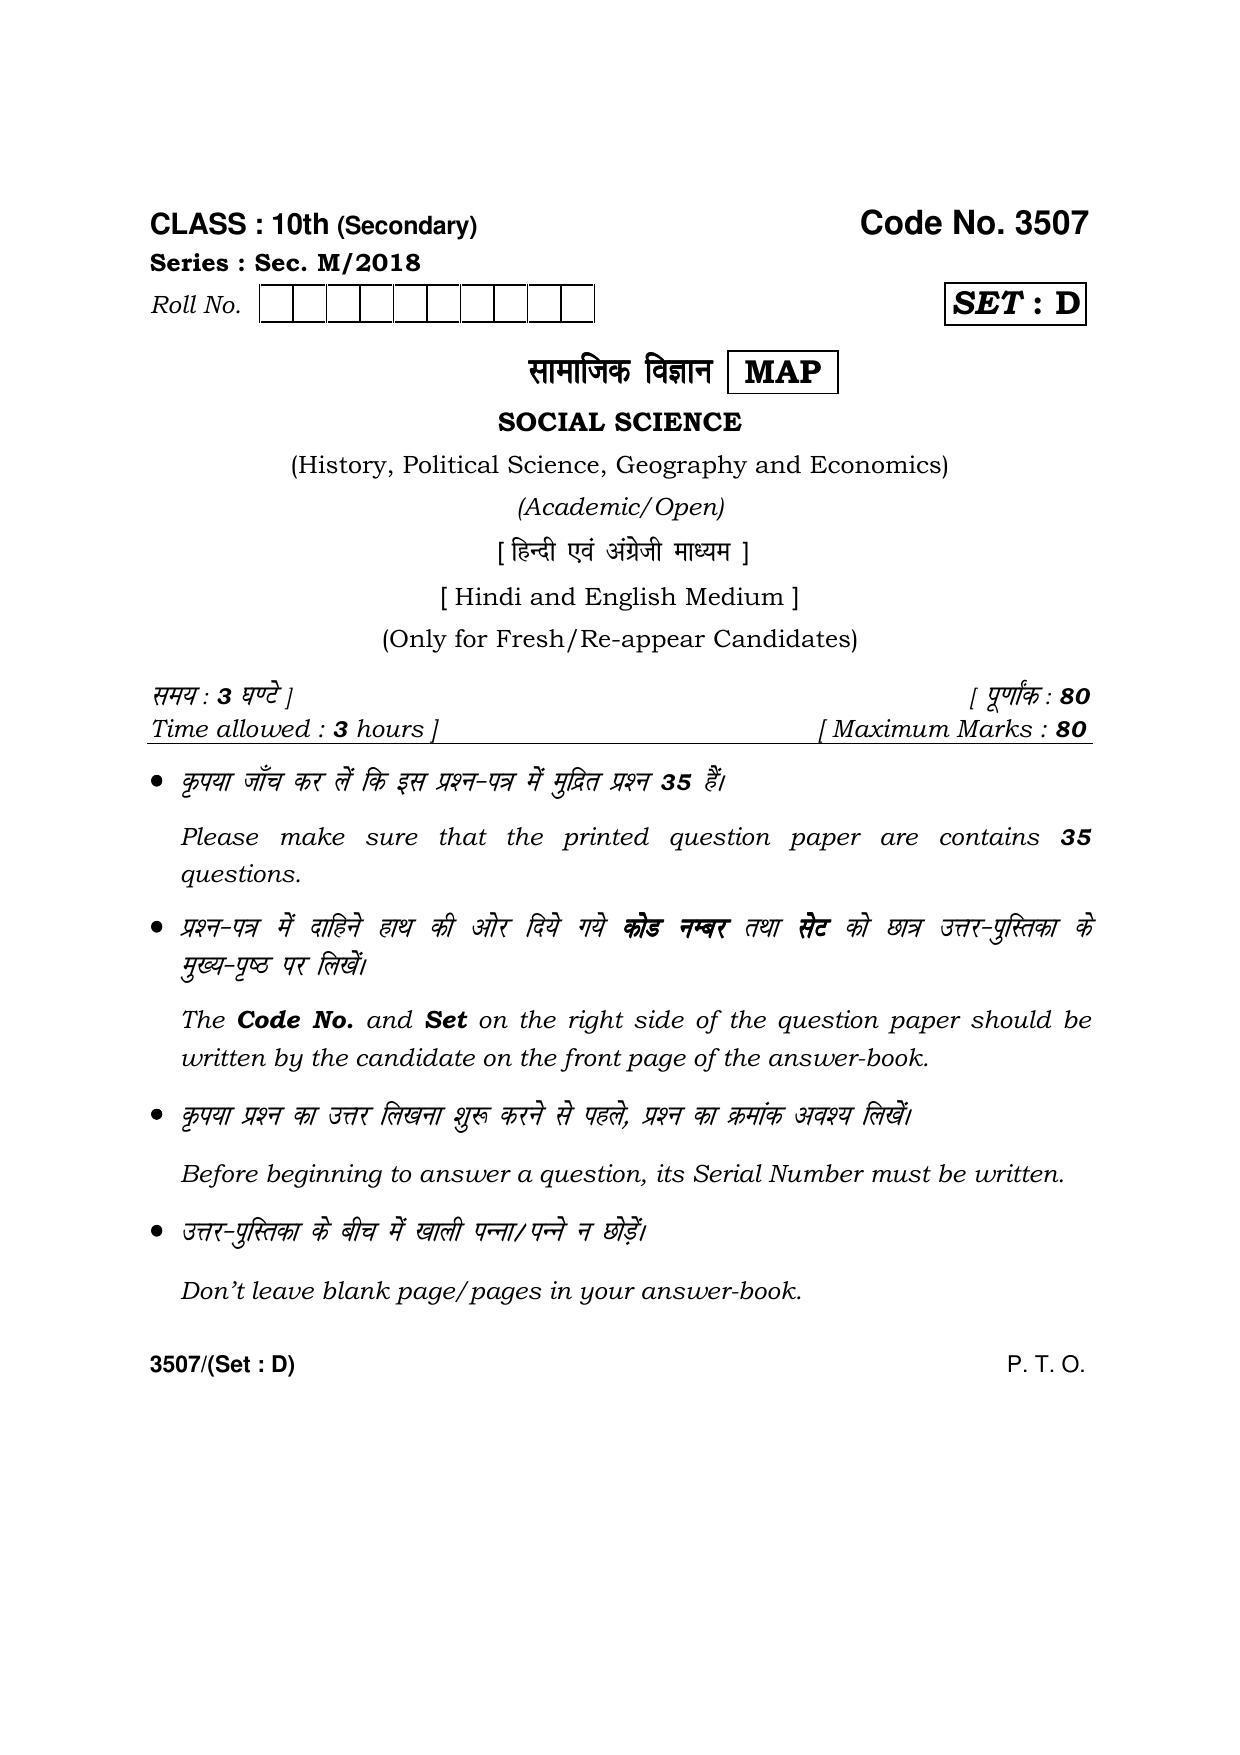 Haryana Board HBSE Class 10 Social Science -D 2018 Question Paper - Page 1